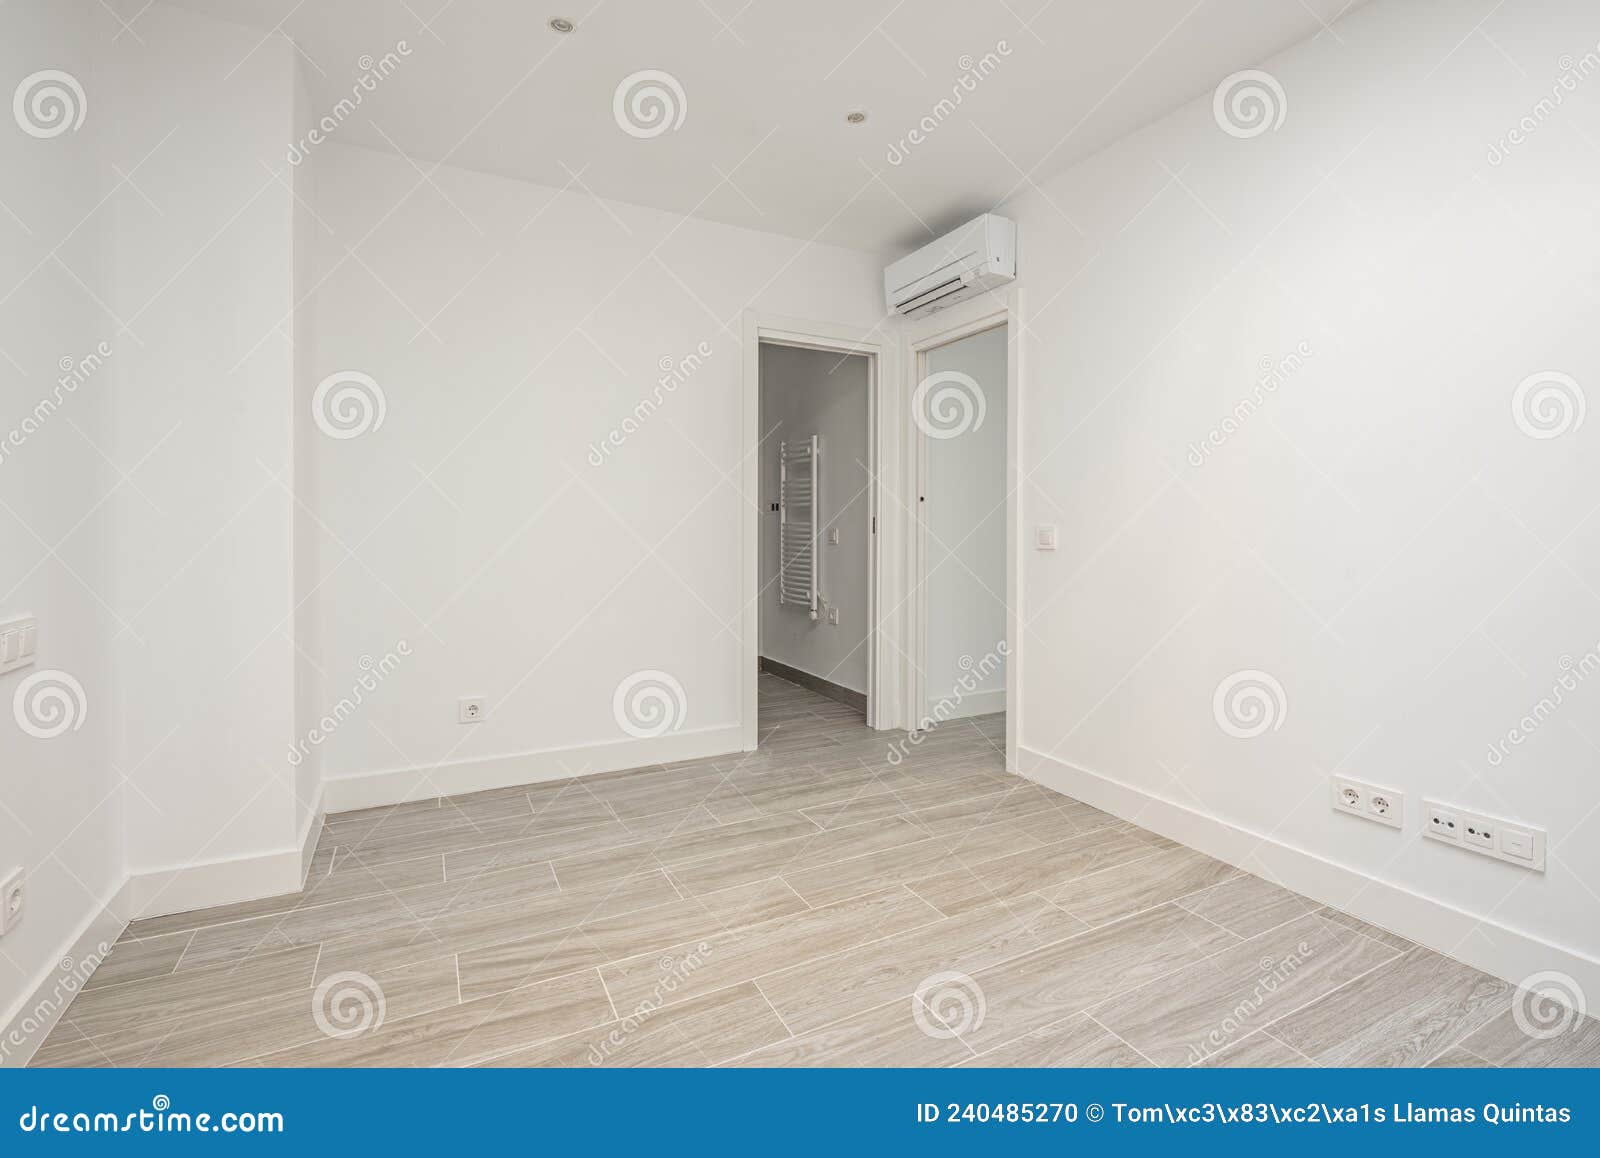 empty air-conditioned bedroom with porcelain stoneware floors